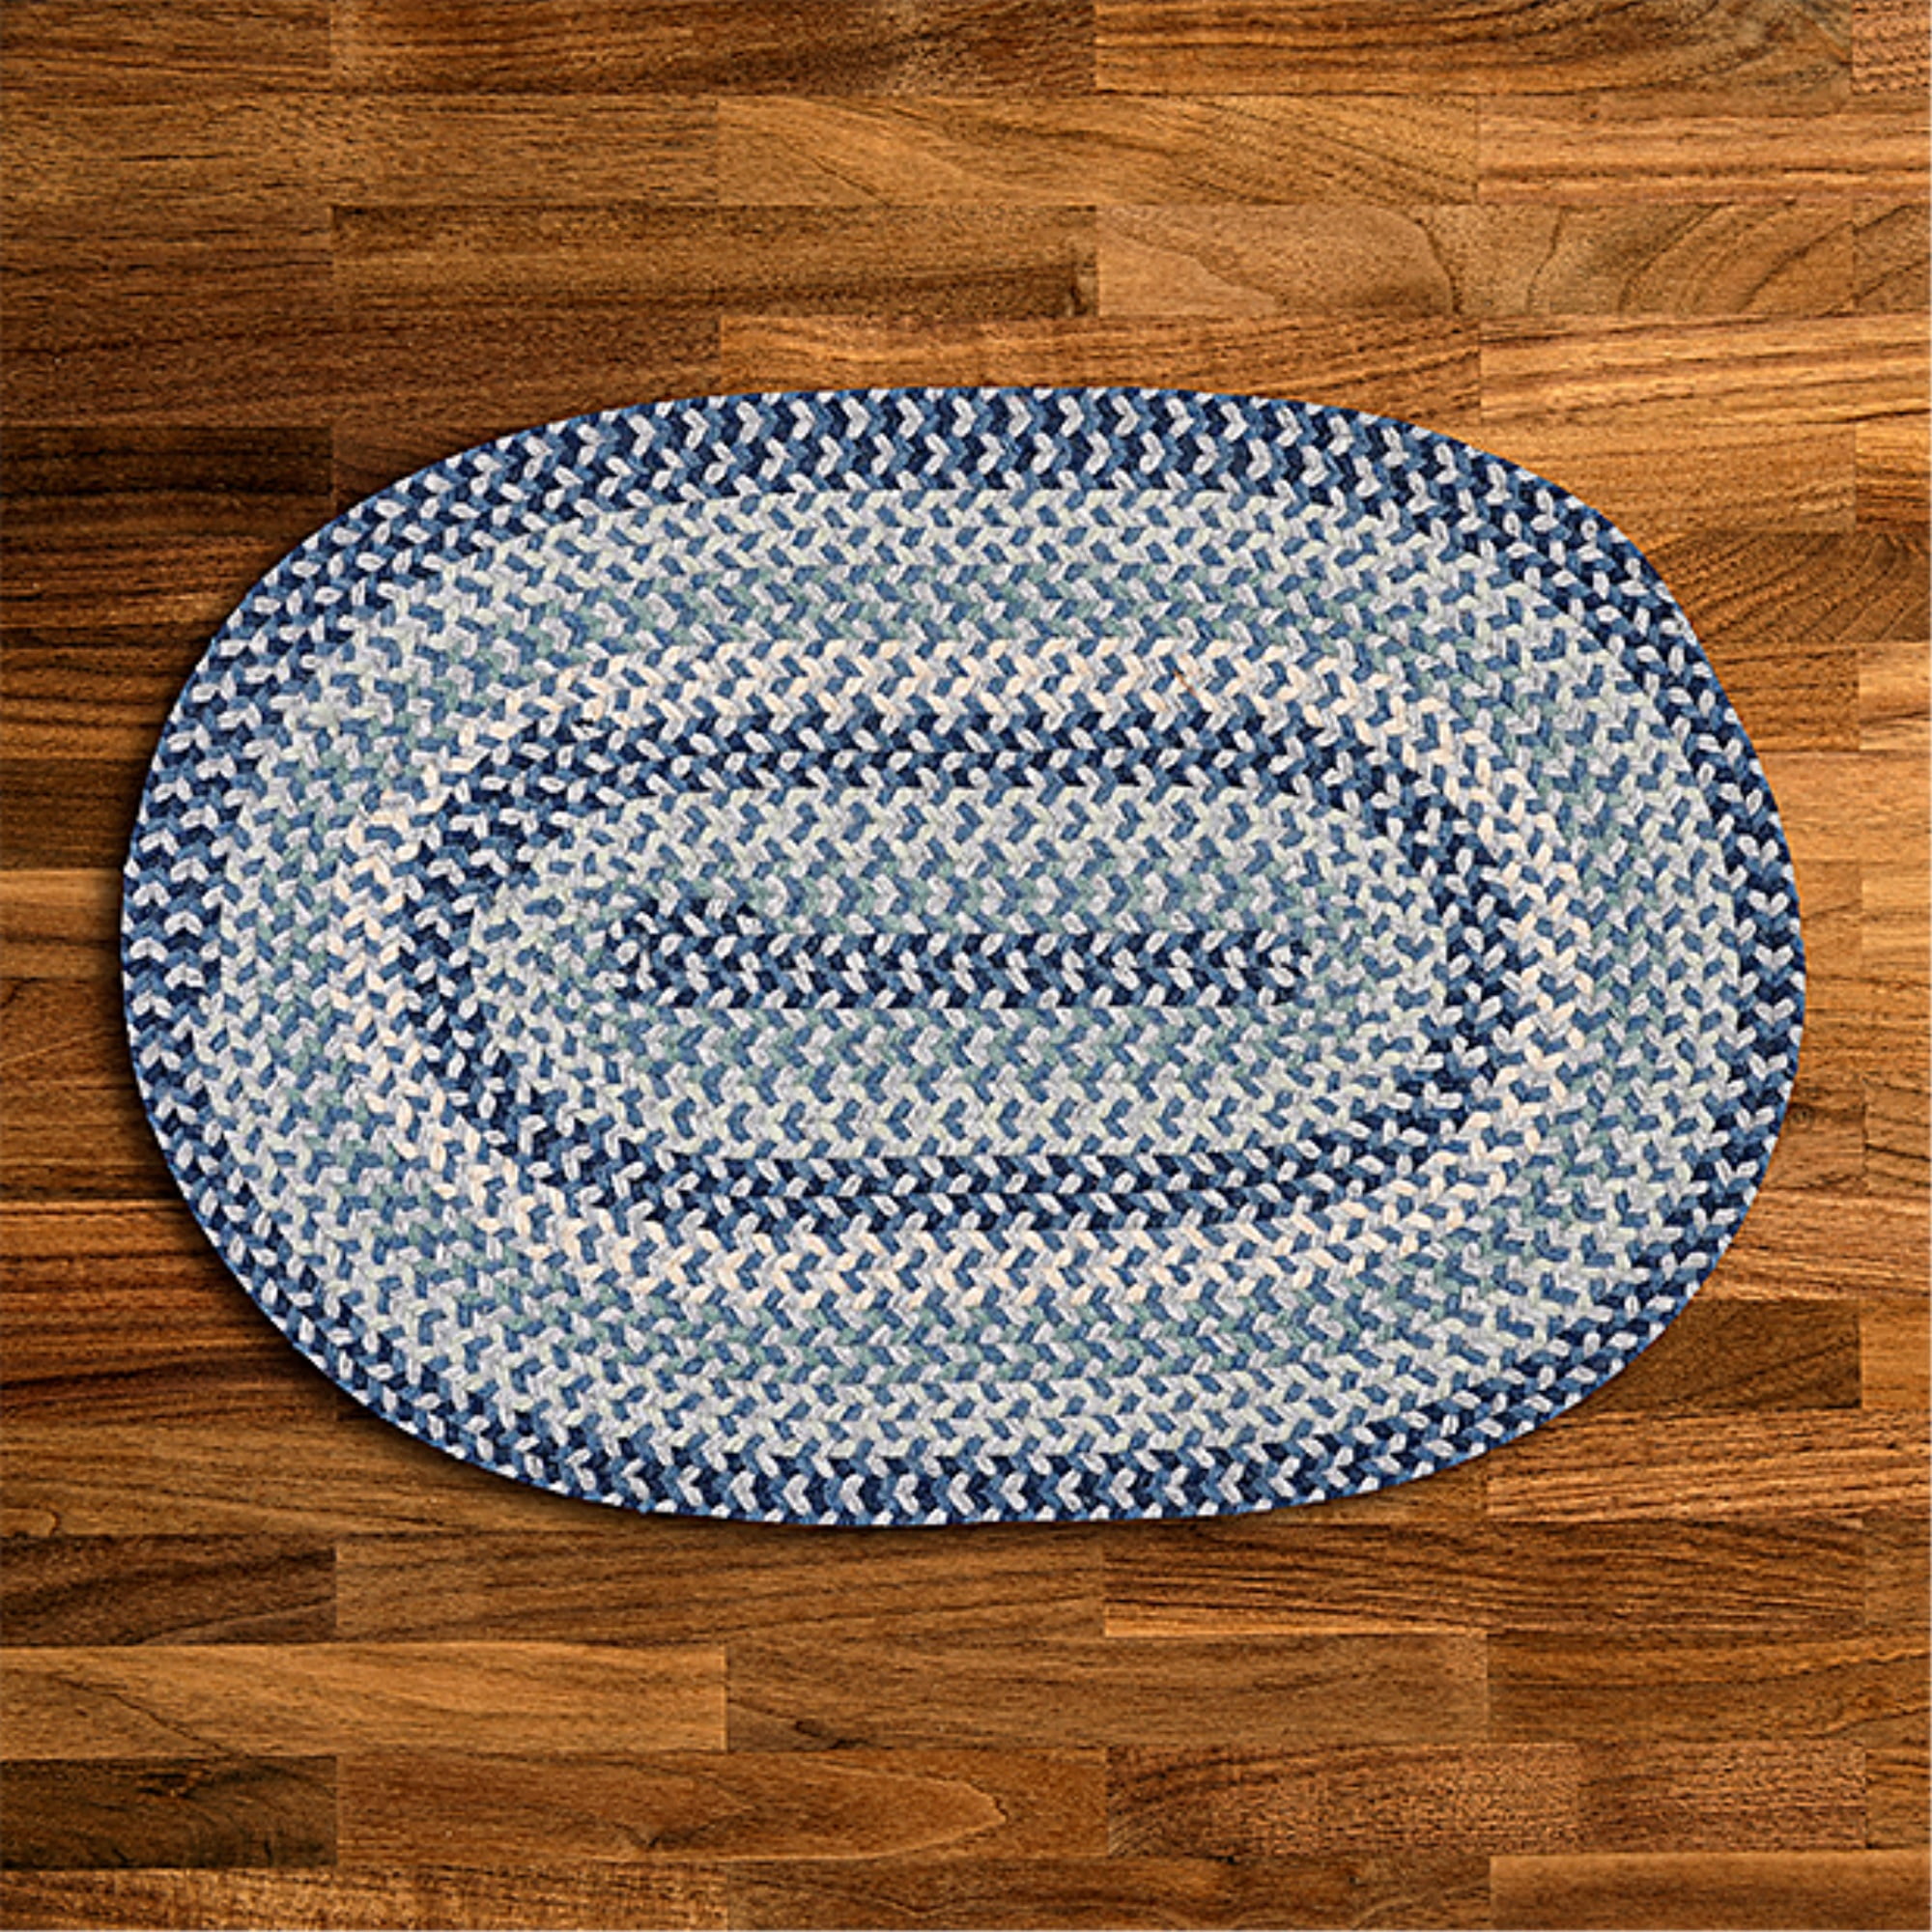 Bc54r024x084 2 X 7 Ft. Boston Common Oval Rug, Driftwood Teal